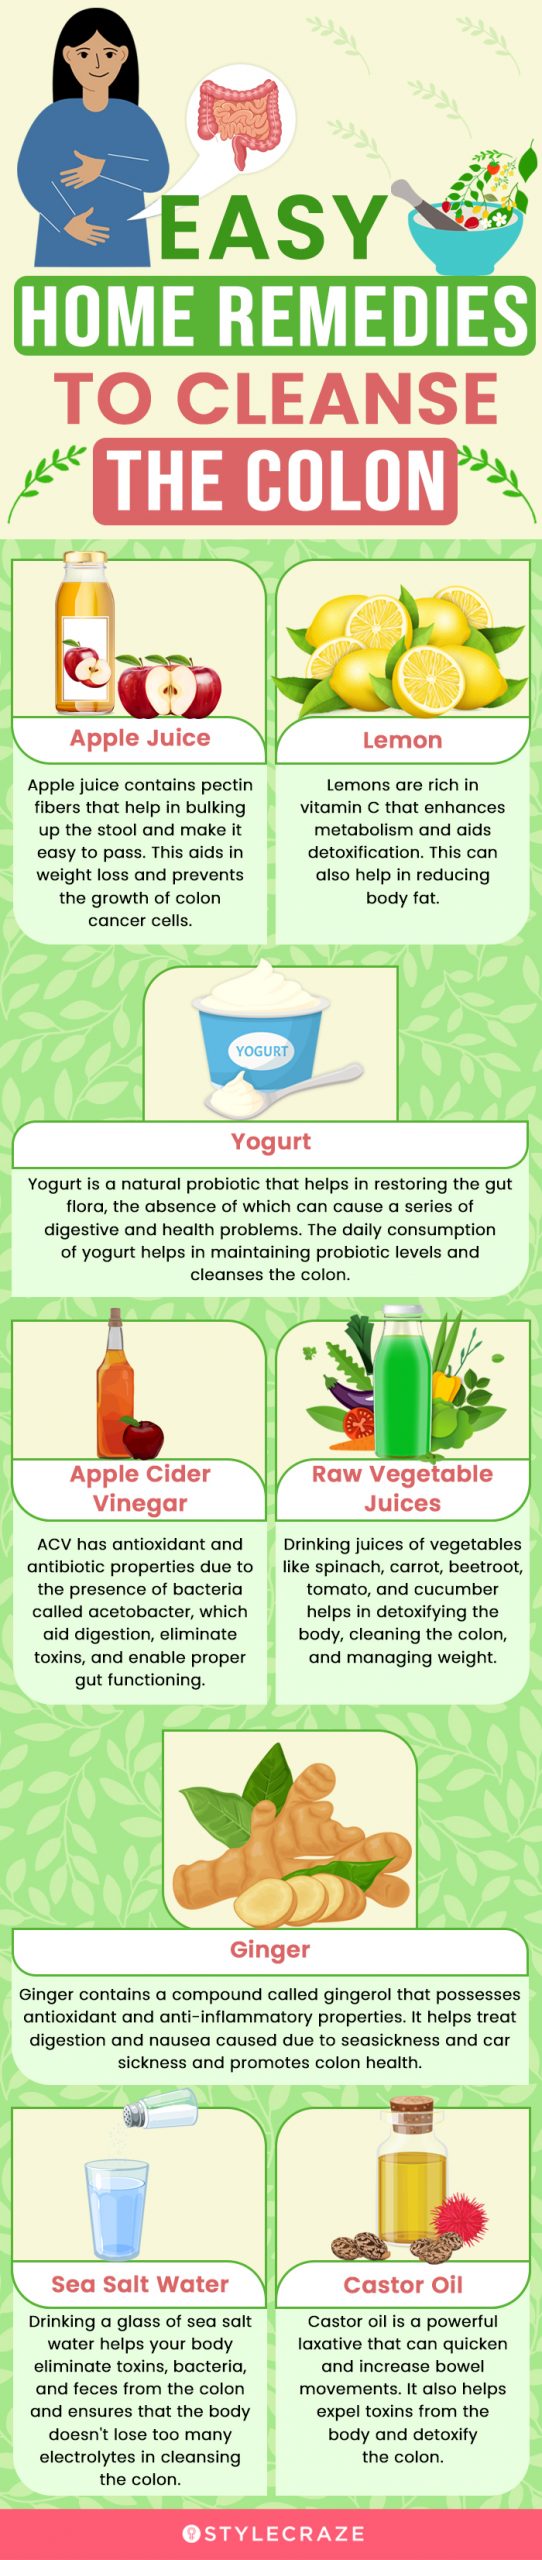 easy home remedies to cleanse colon [infographic]